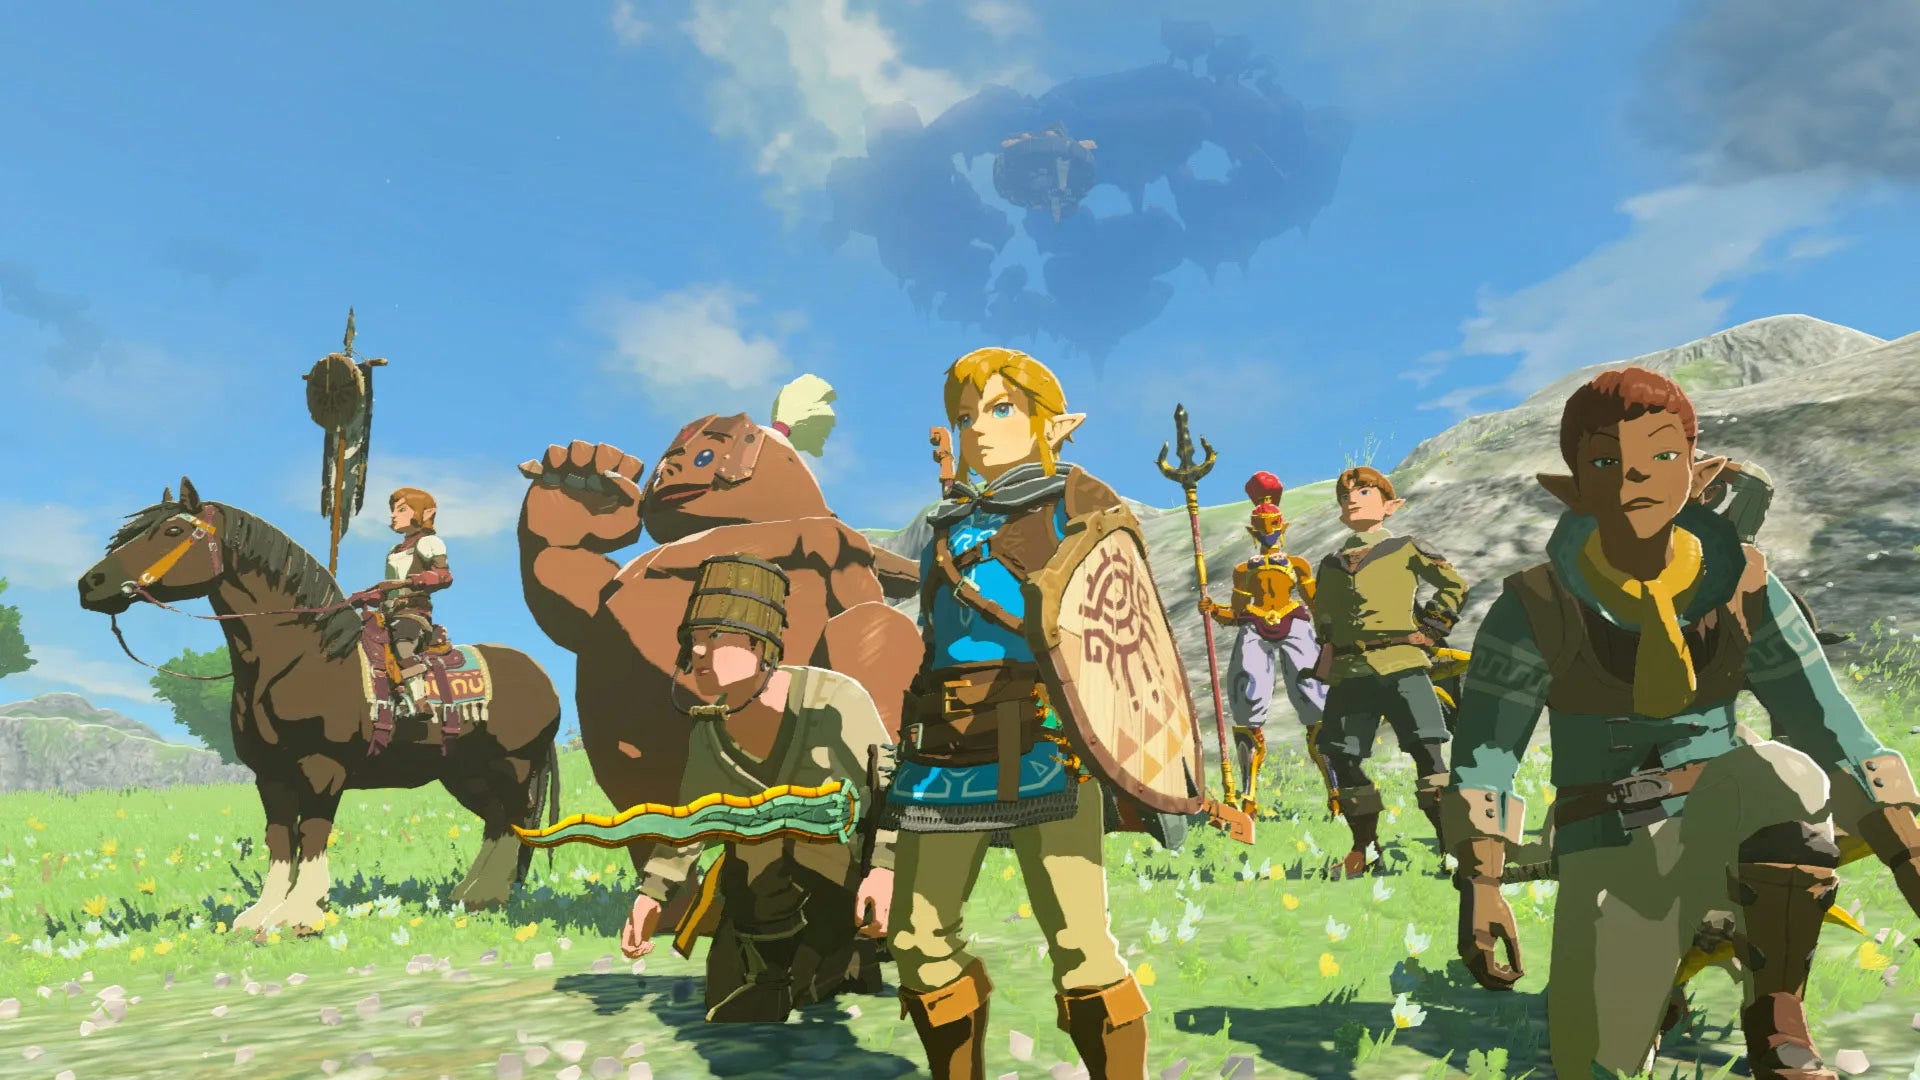 Link and friends standing in Hyrule field.